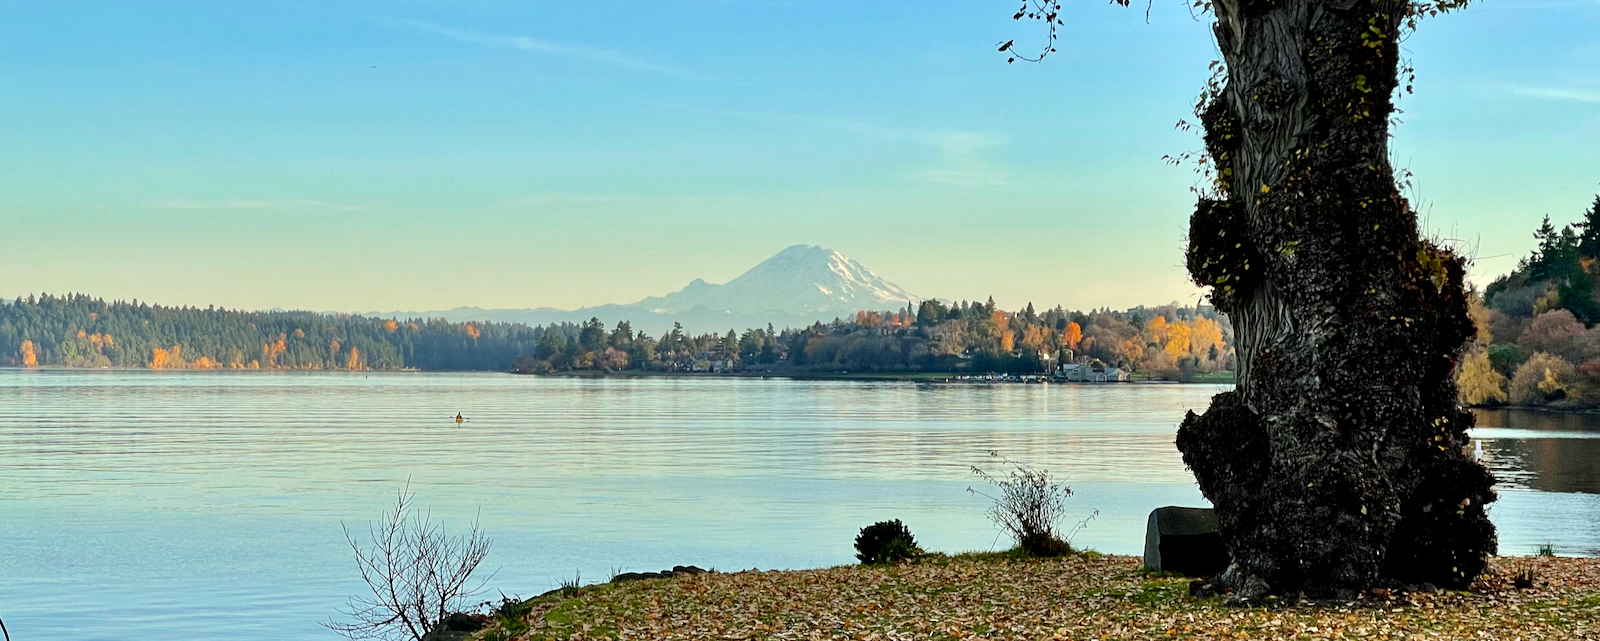 mountain in distance across a placid lake